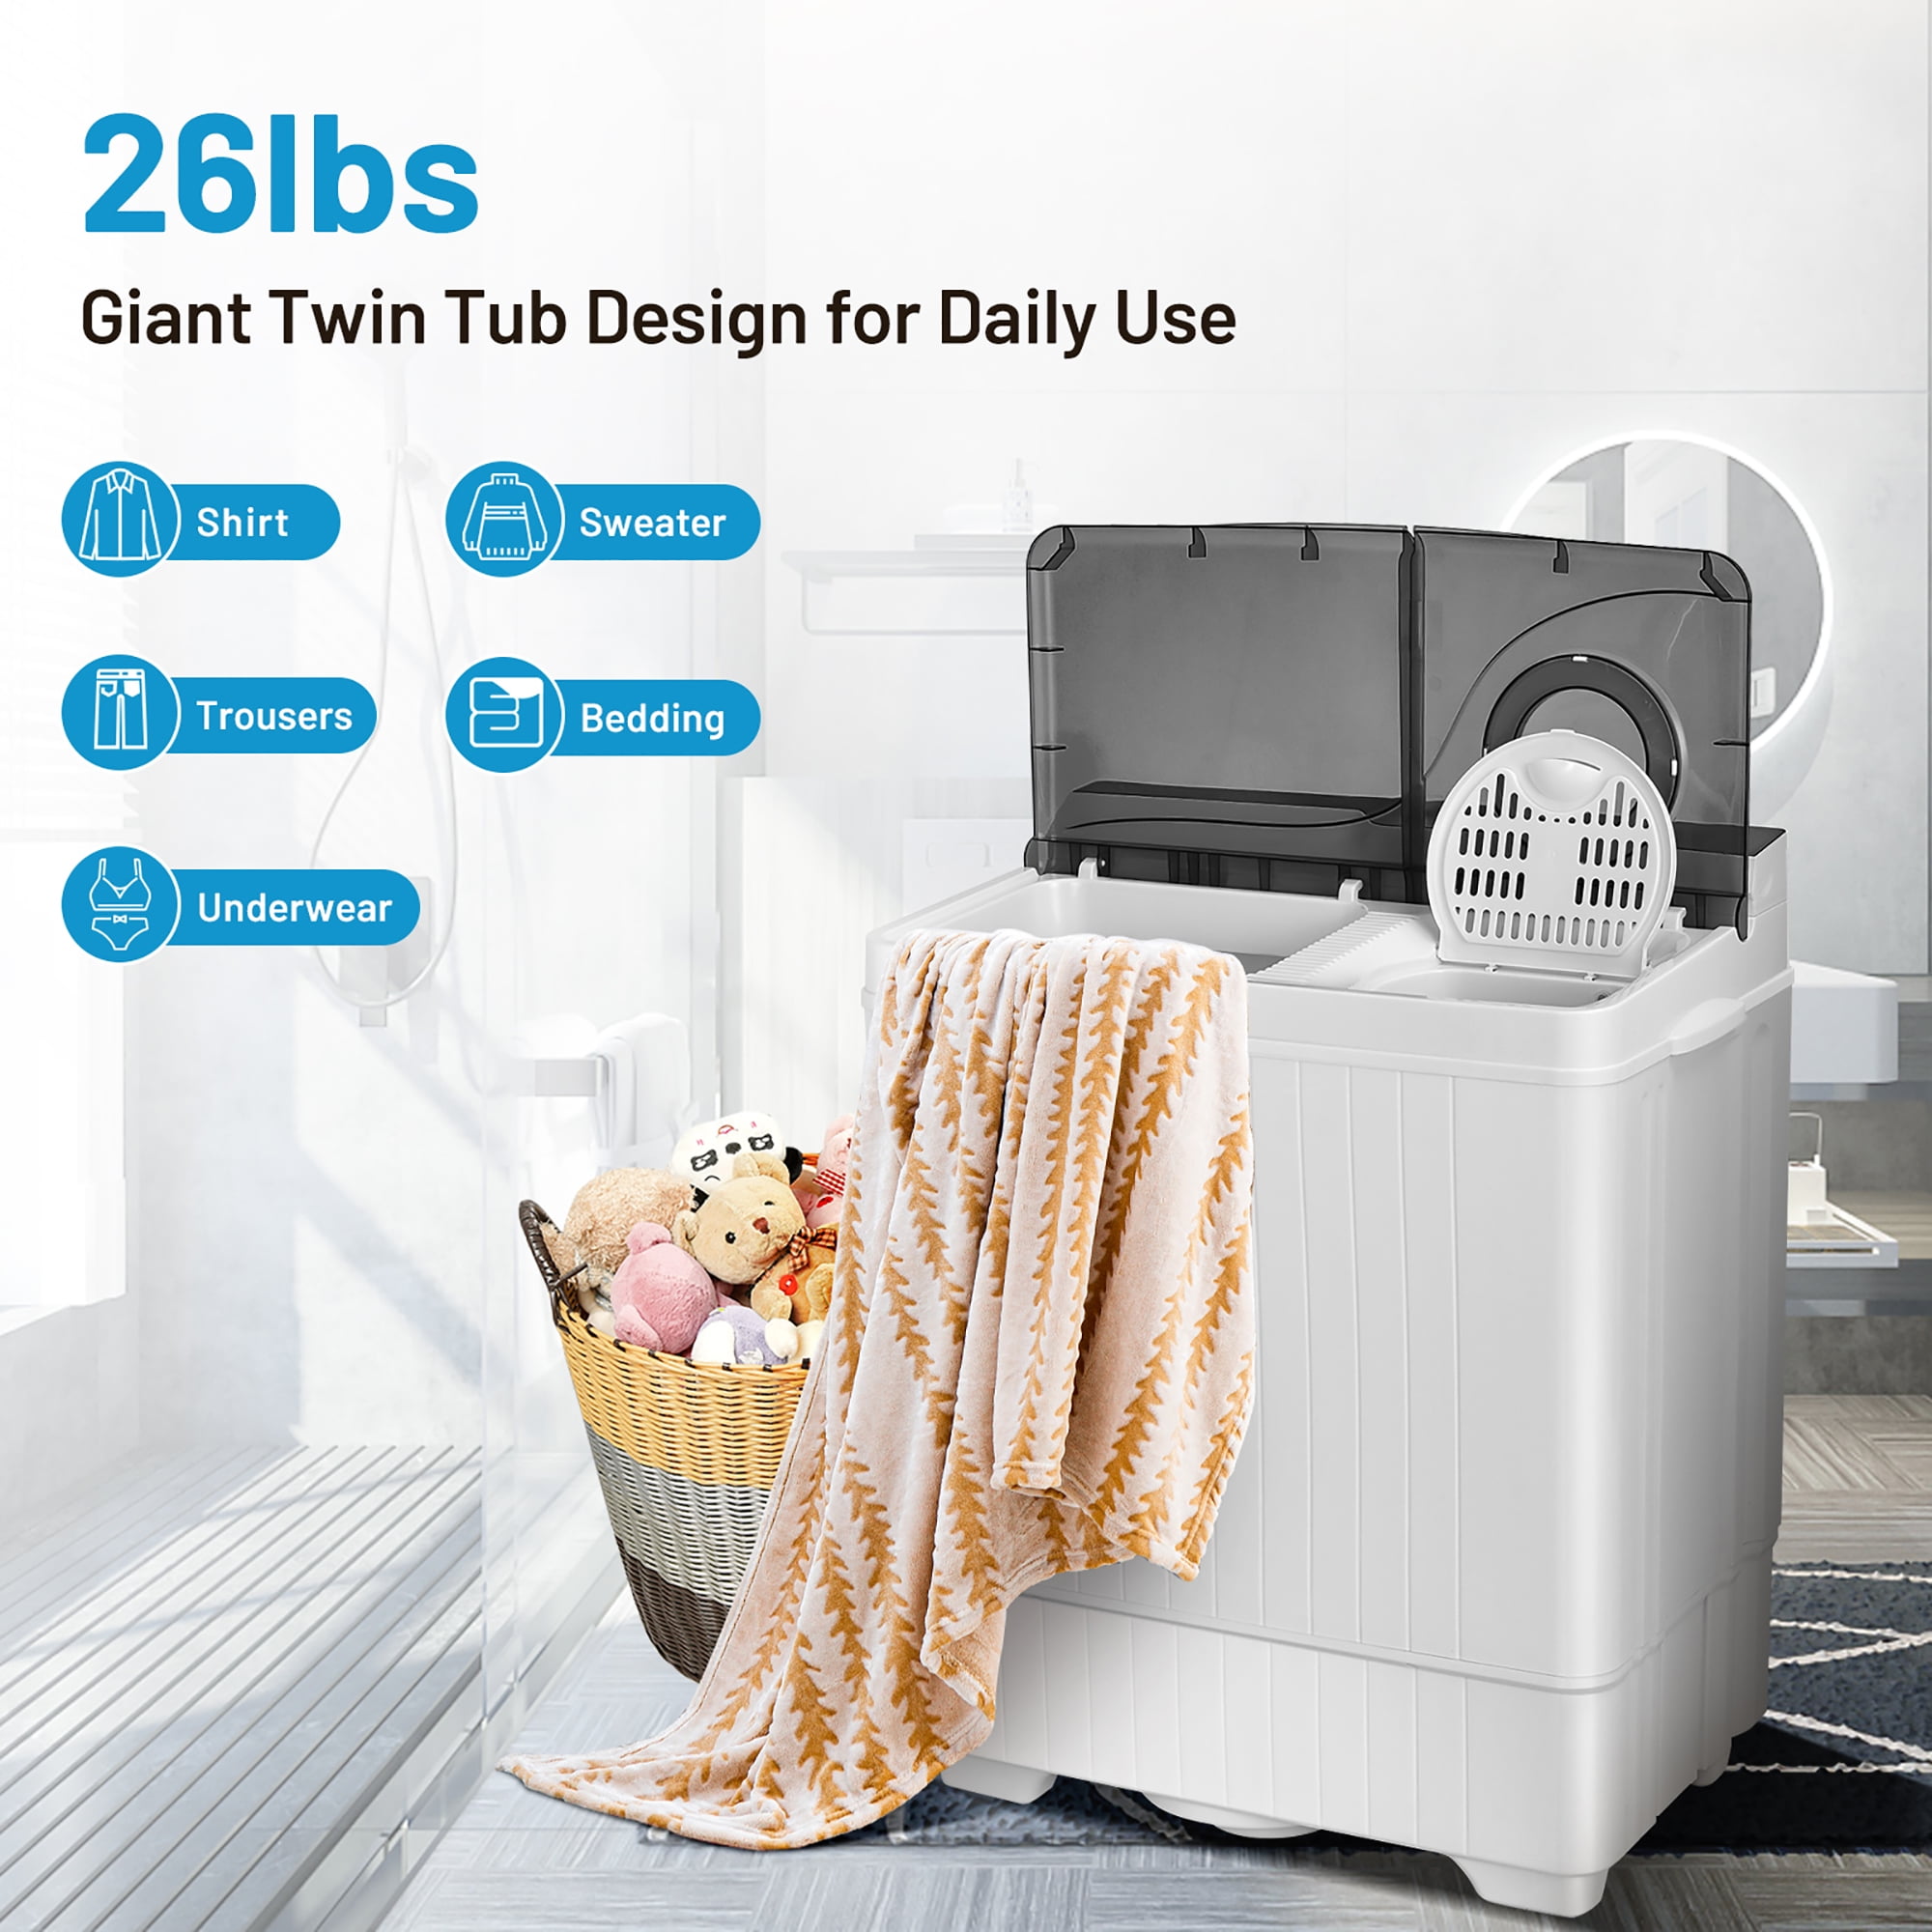 Small Semi-Automatic Compact Washing Machine with Timer Control Single Translucent Tub 7lbs Capacity Portable Washer for Compact Laundry Blue and White COSTWAY Mini Washing Machine 